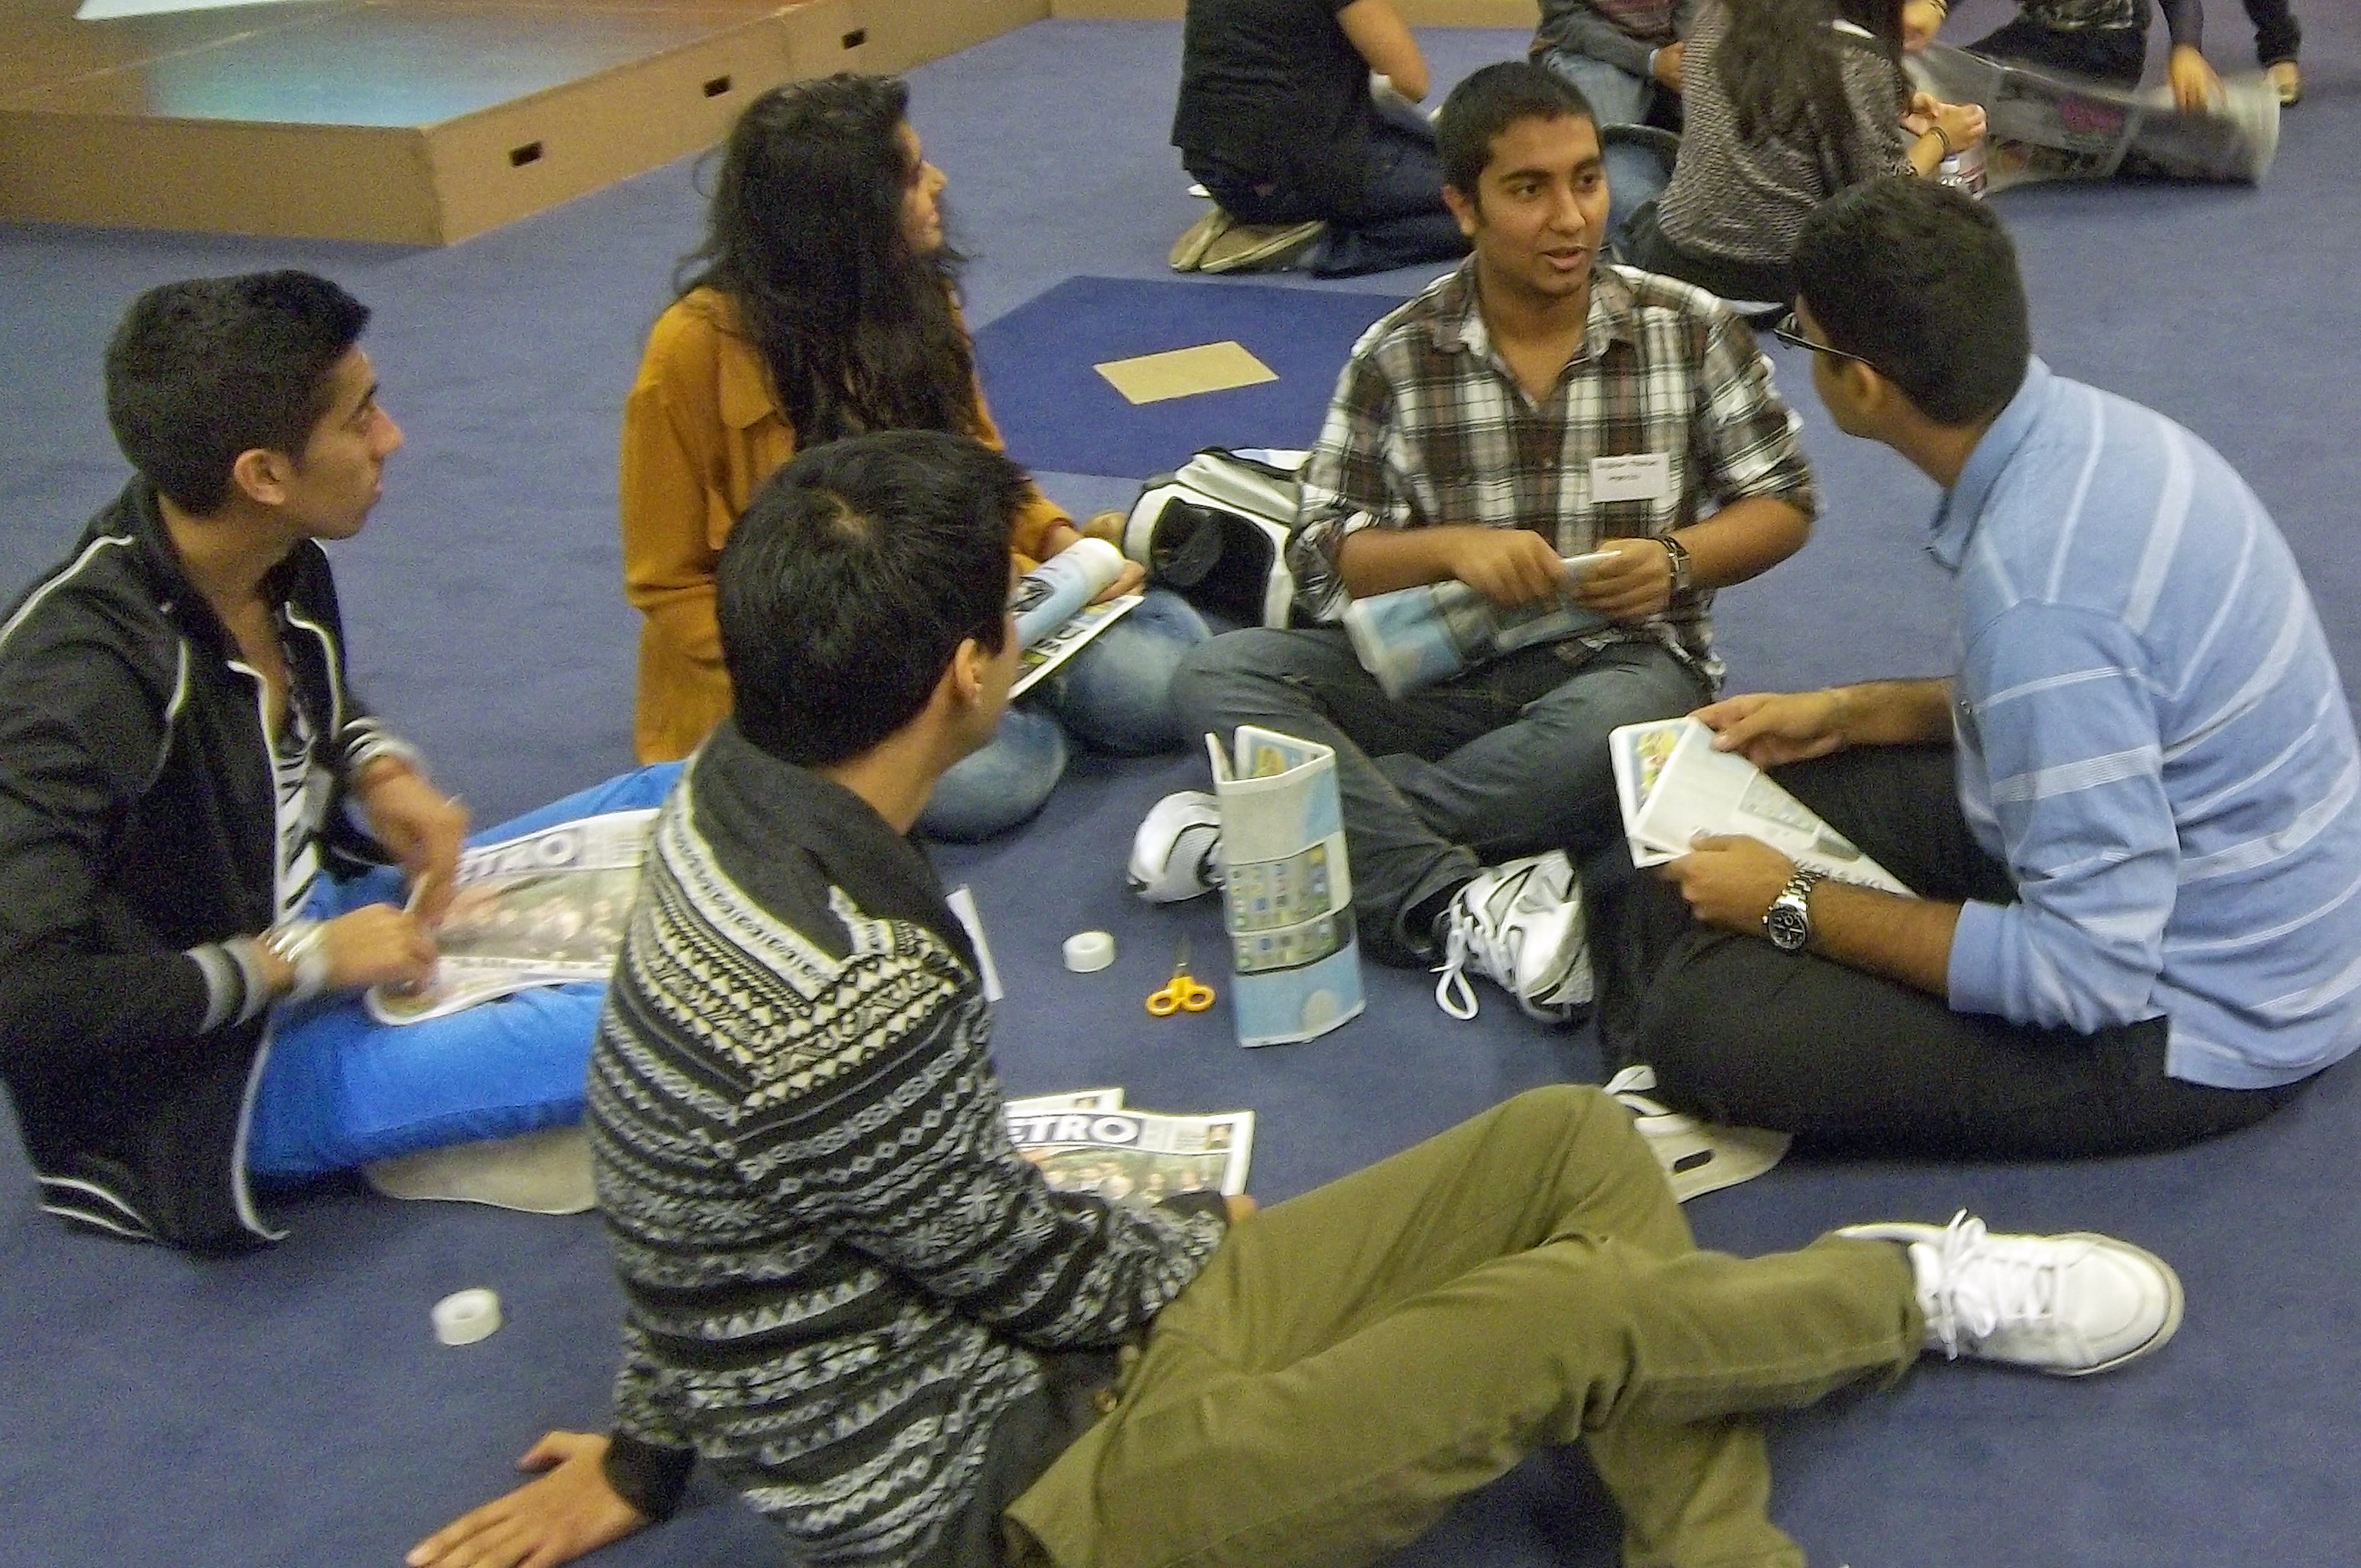 A discussion on healthy eating at an Ismaili Students' Network event in the UK. Photo: Khaleel Ladhani